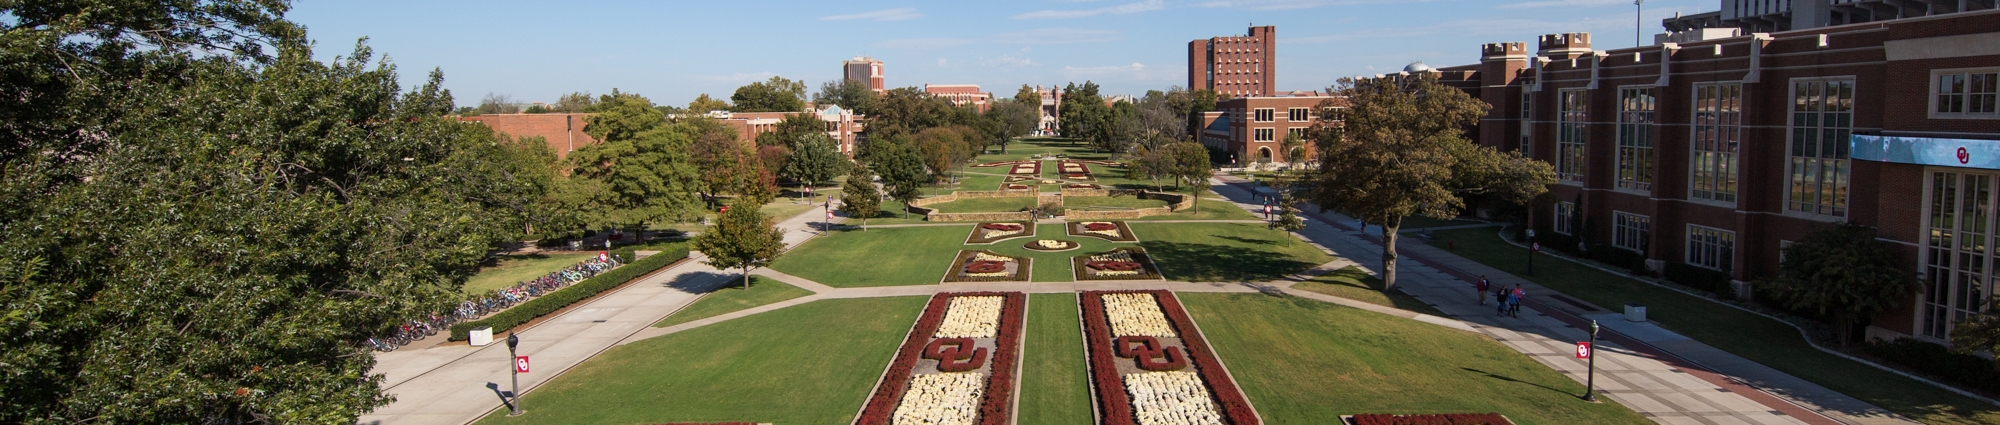 The South Oval at the University of Oklahoma.